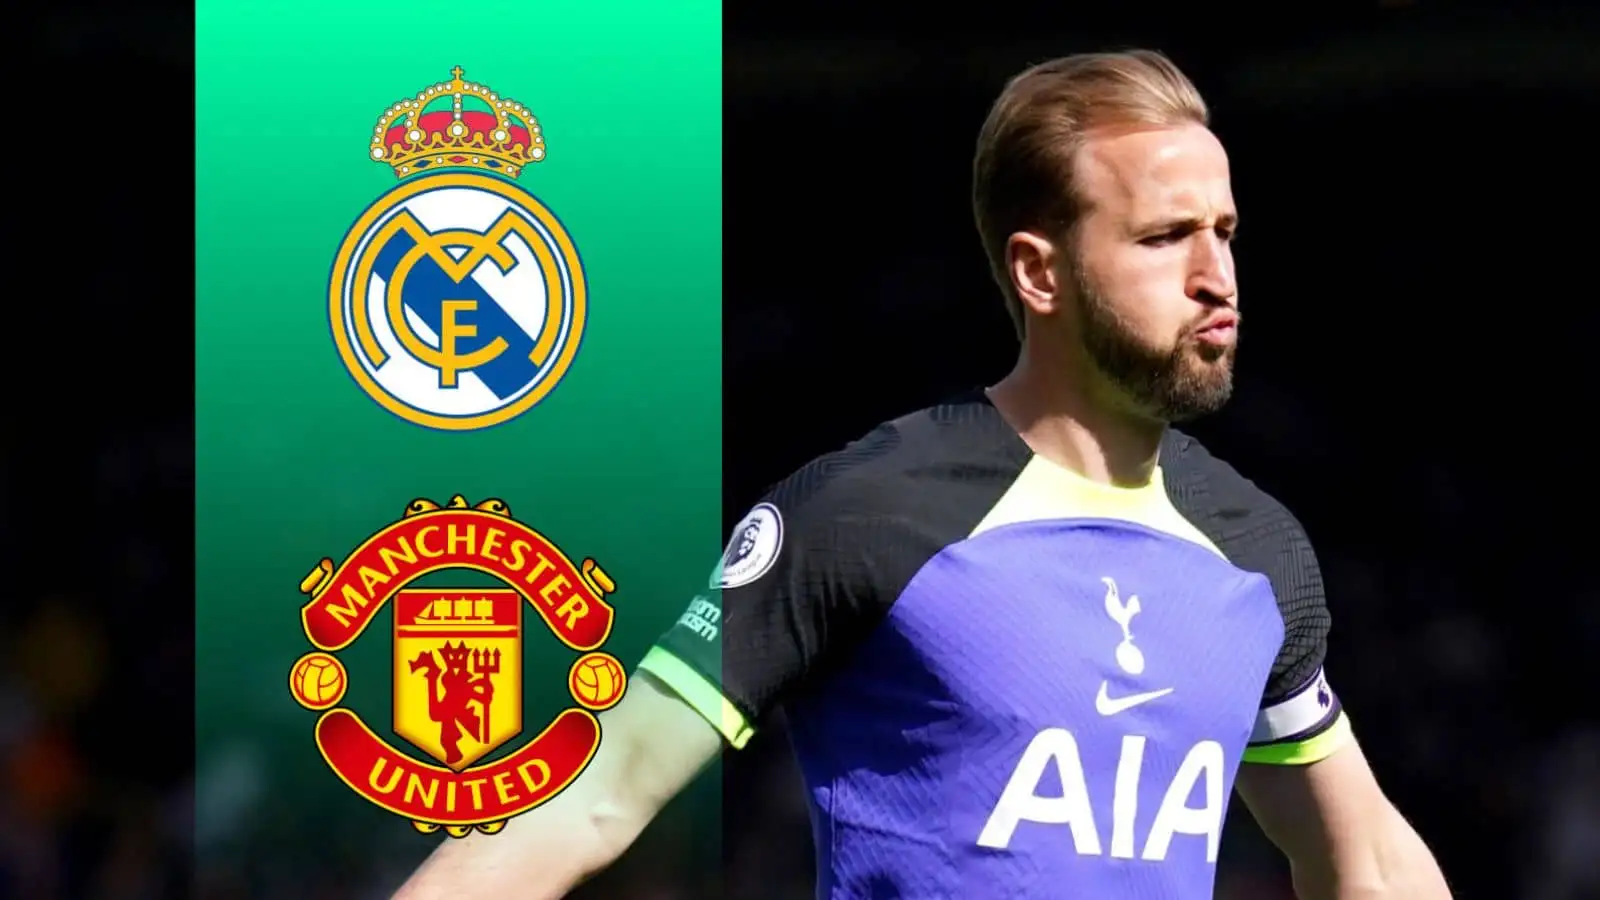 Harry Kane of Tottenham is a transfer target Man Utd and Real Madrid